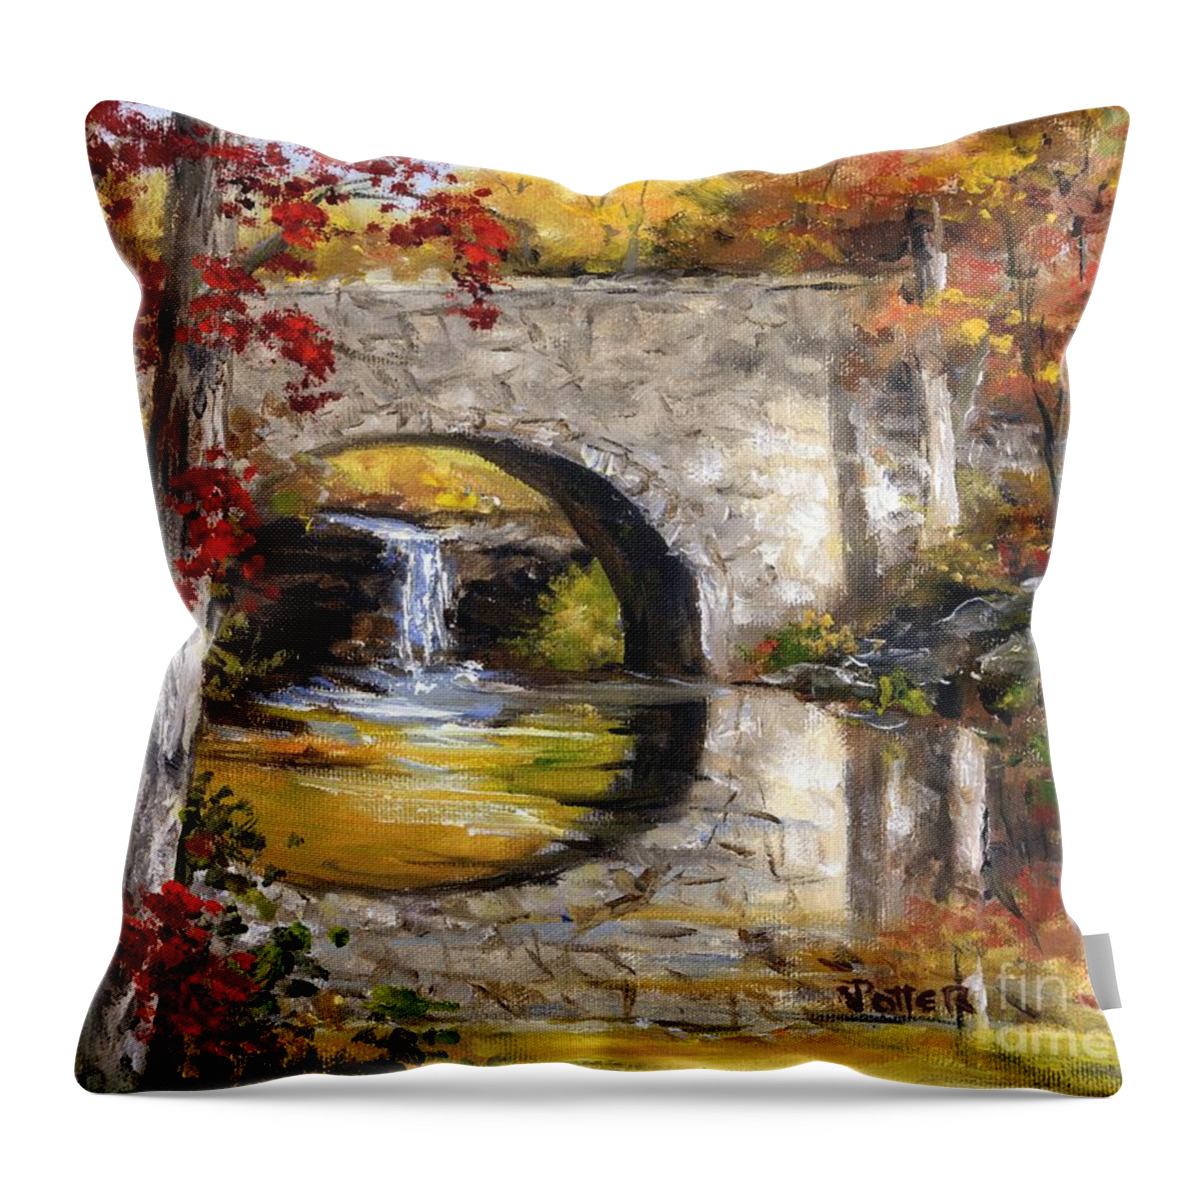 Arkansas Landscapes Throw Pillow featuring the painting Davies Bridge November by Virginia Potter